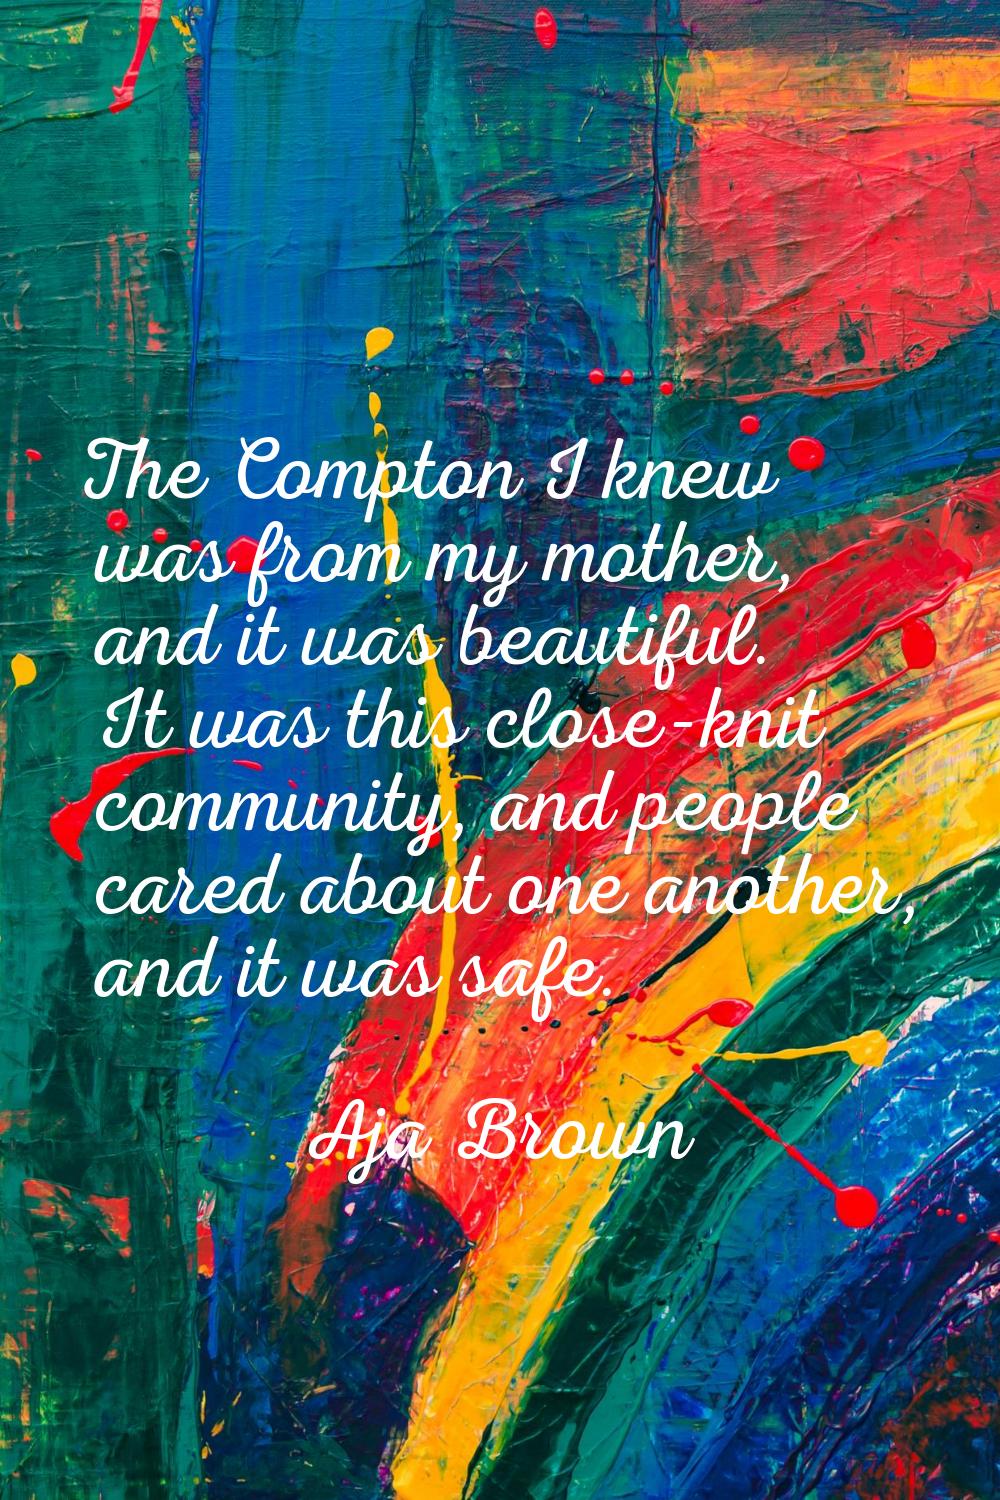 The Compton I knew was from my mother, and it was beautiful. It was this close-knit community, and 